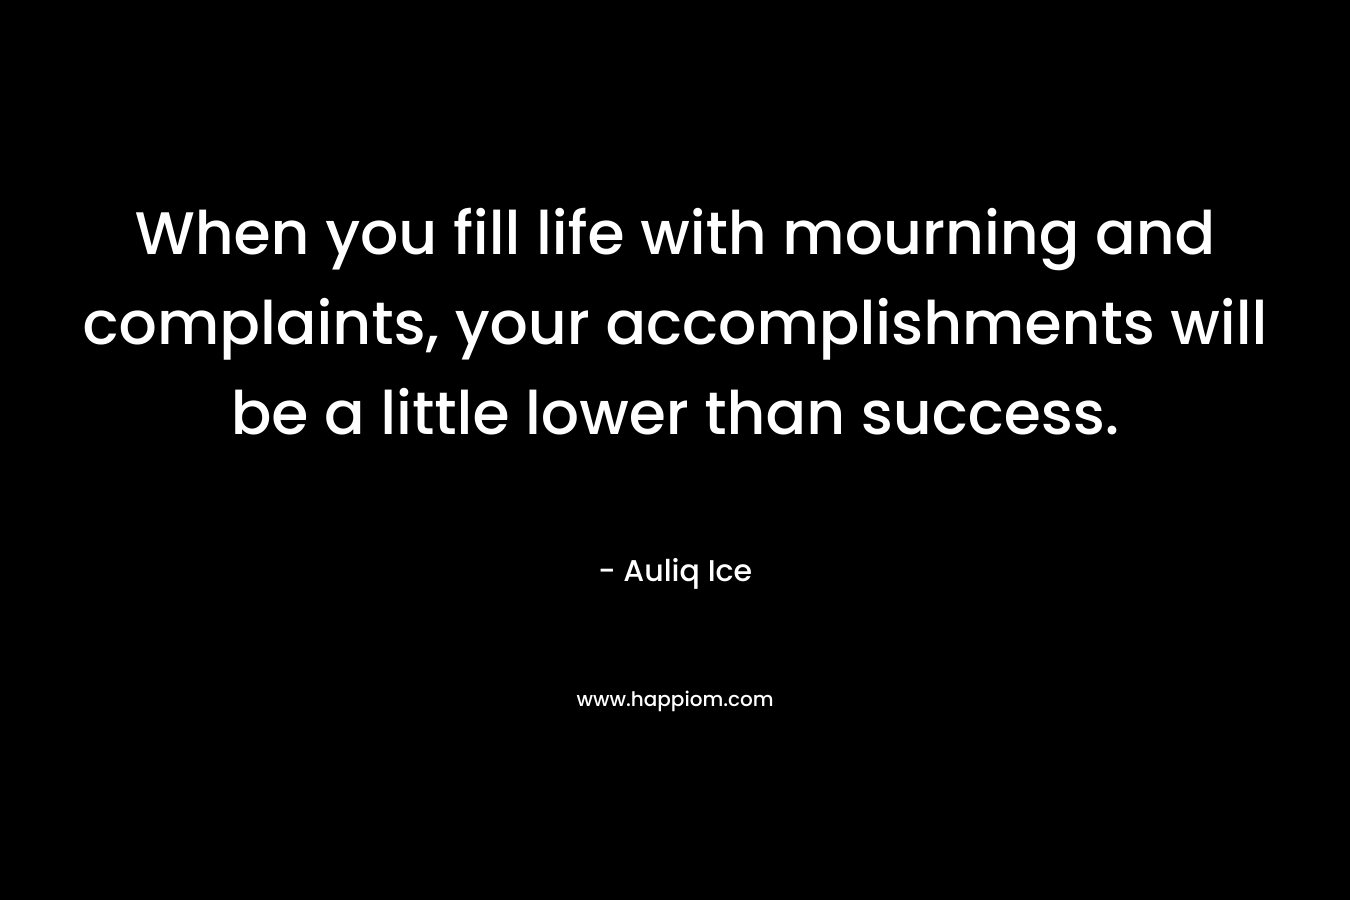 When you fill life with mourning and complaints, your accomplishments will be a little lower than success. – Auliq Ice